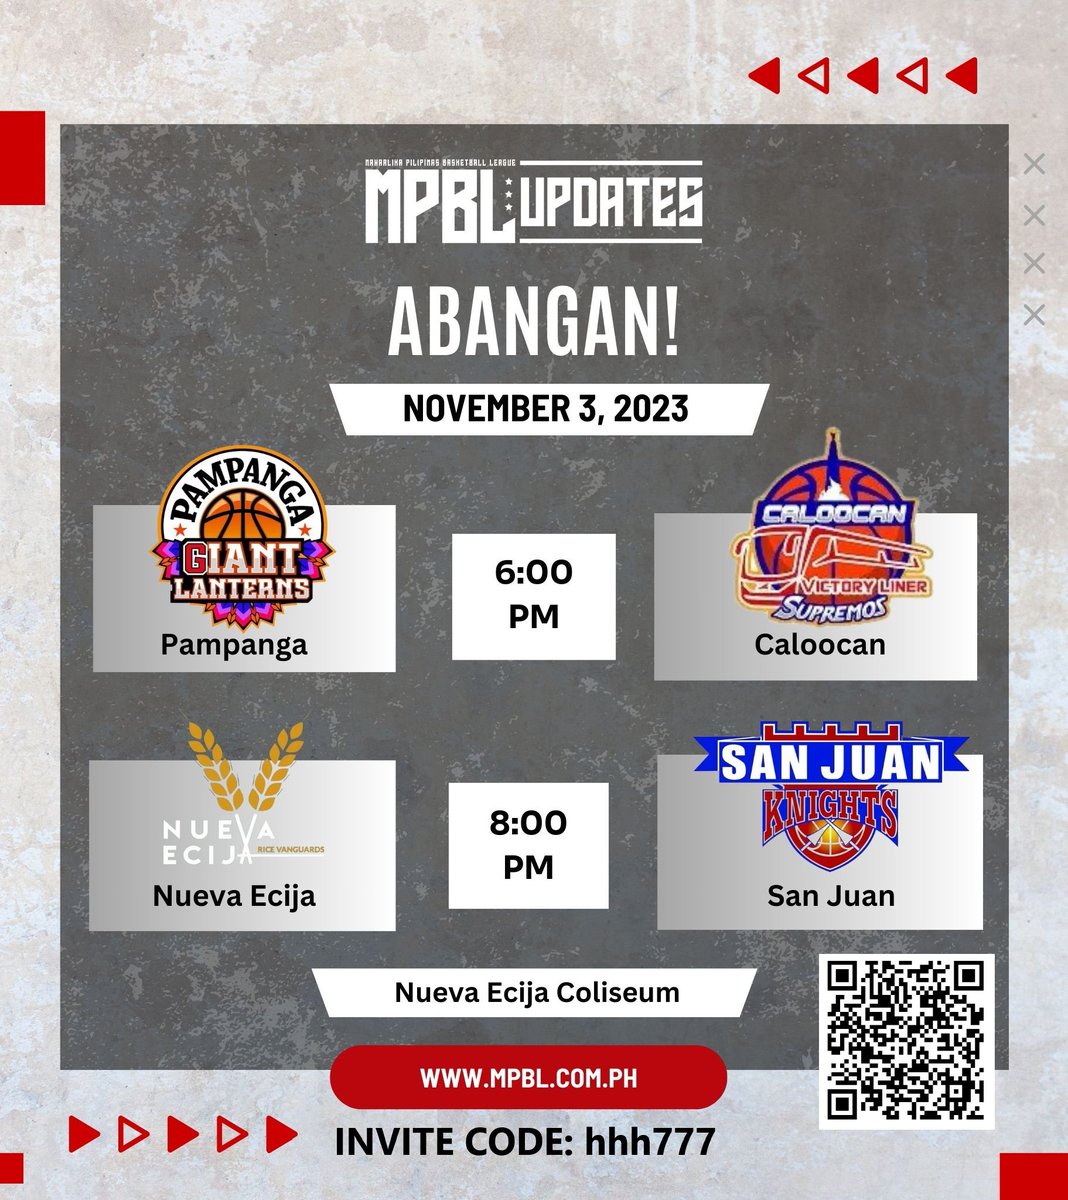 MPBL Playoffs Game Schedule
North Division Semis Game 2
Who do you got?
OKBET got you covered!
Join via linky.ph/AnneC
PM ME TO GUIDE YOU!
#mpbl
#sportsbet #mpblplayoffs
#basketball  #bettingsports